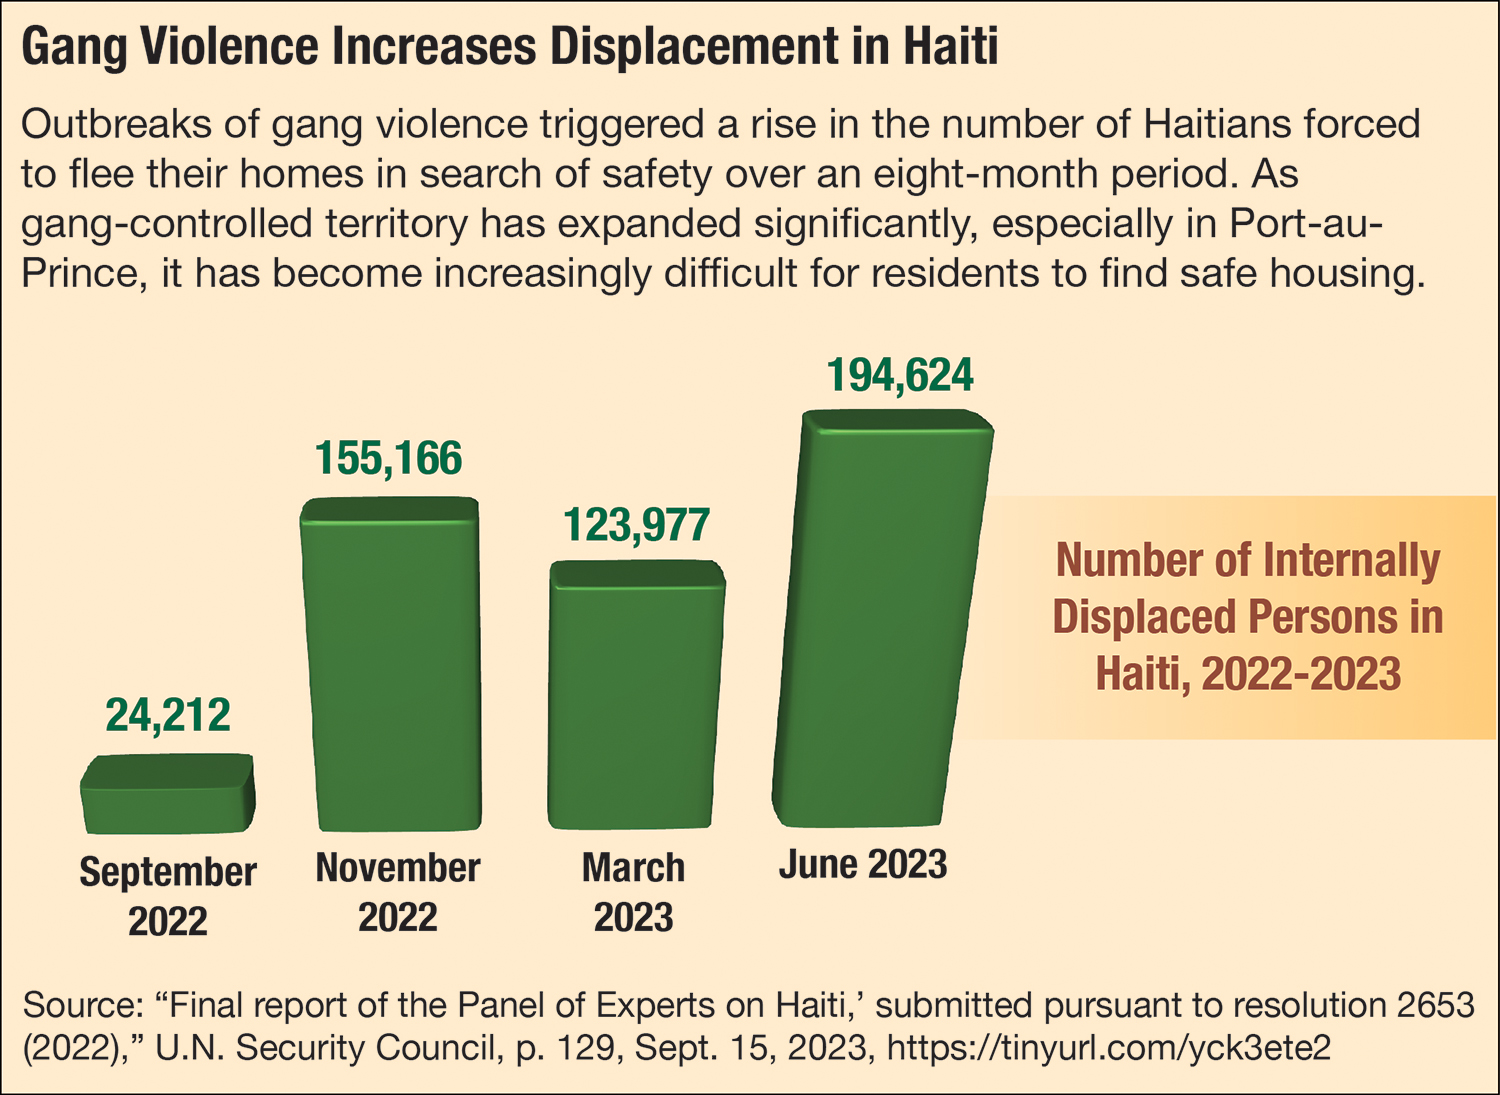 The vertical bar graph shows the number of internally displaced persons in Haiti from 2022 to 2023.